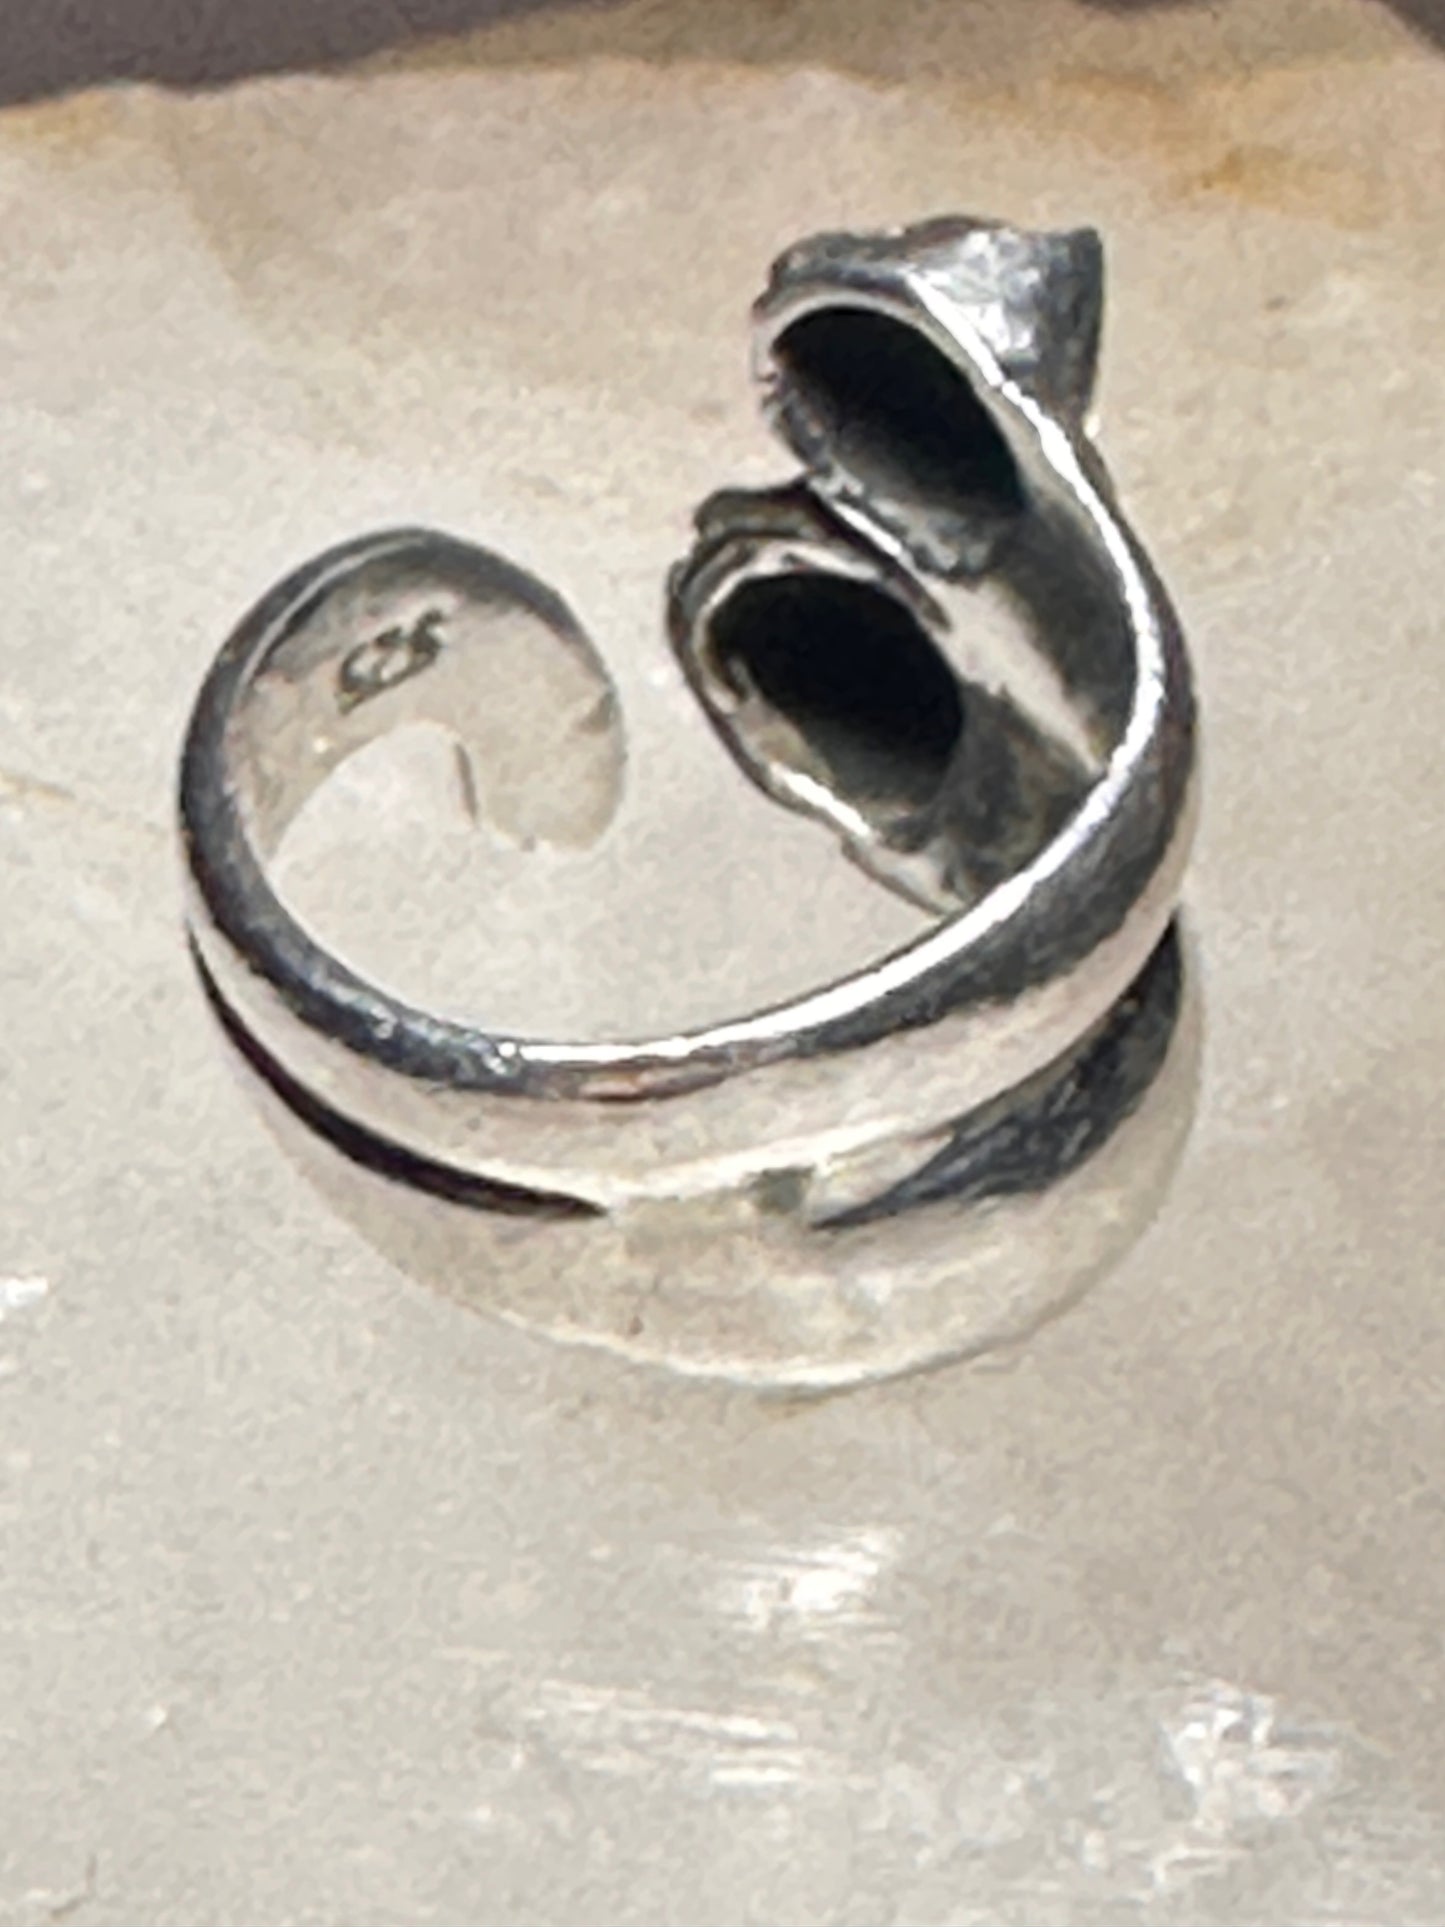 Cat ring size 5.50 cats kitten band  sterling silver sterling women girls